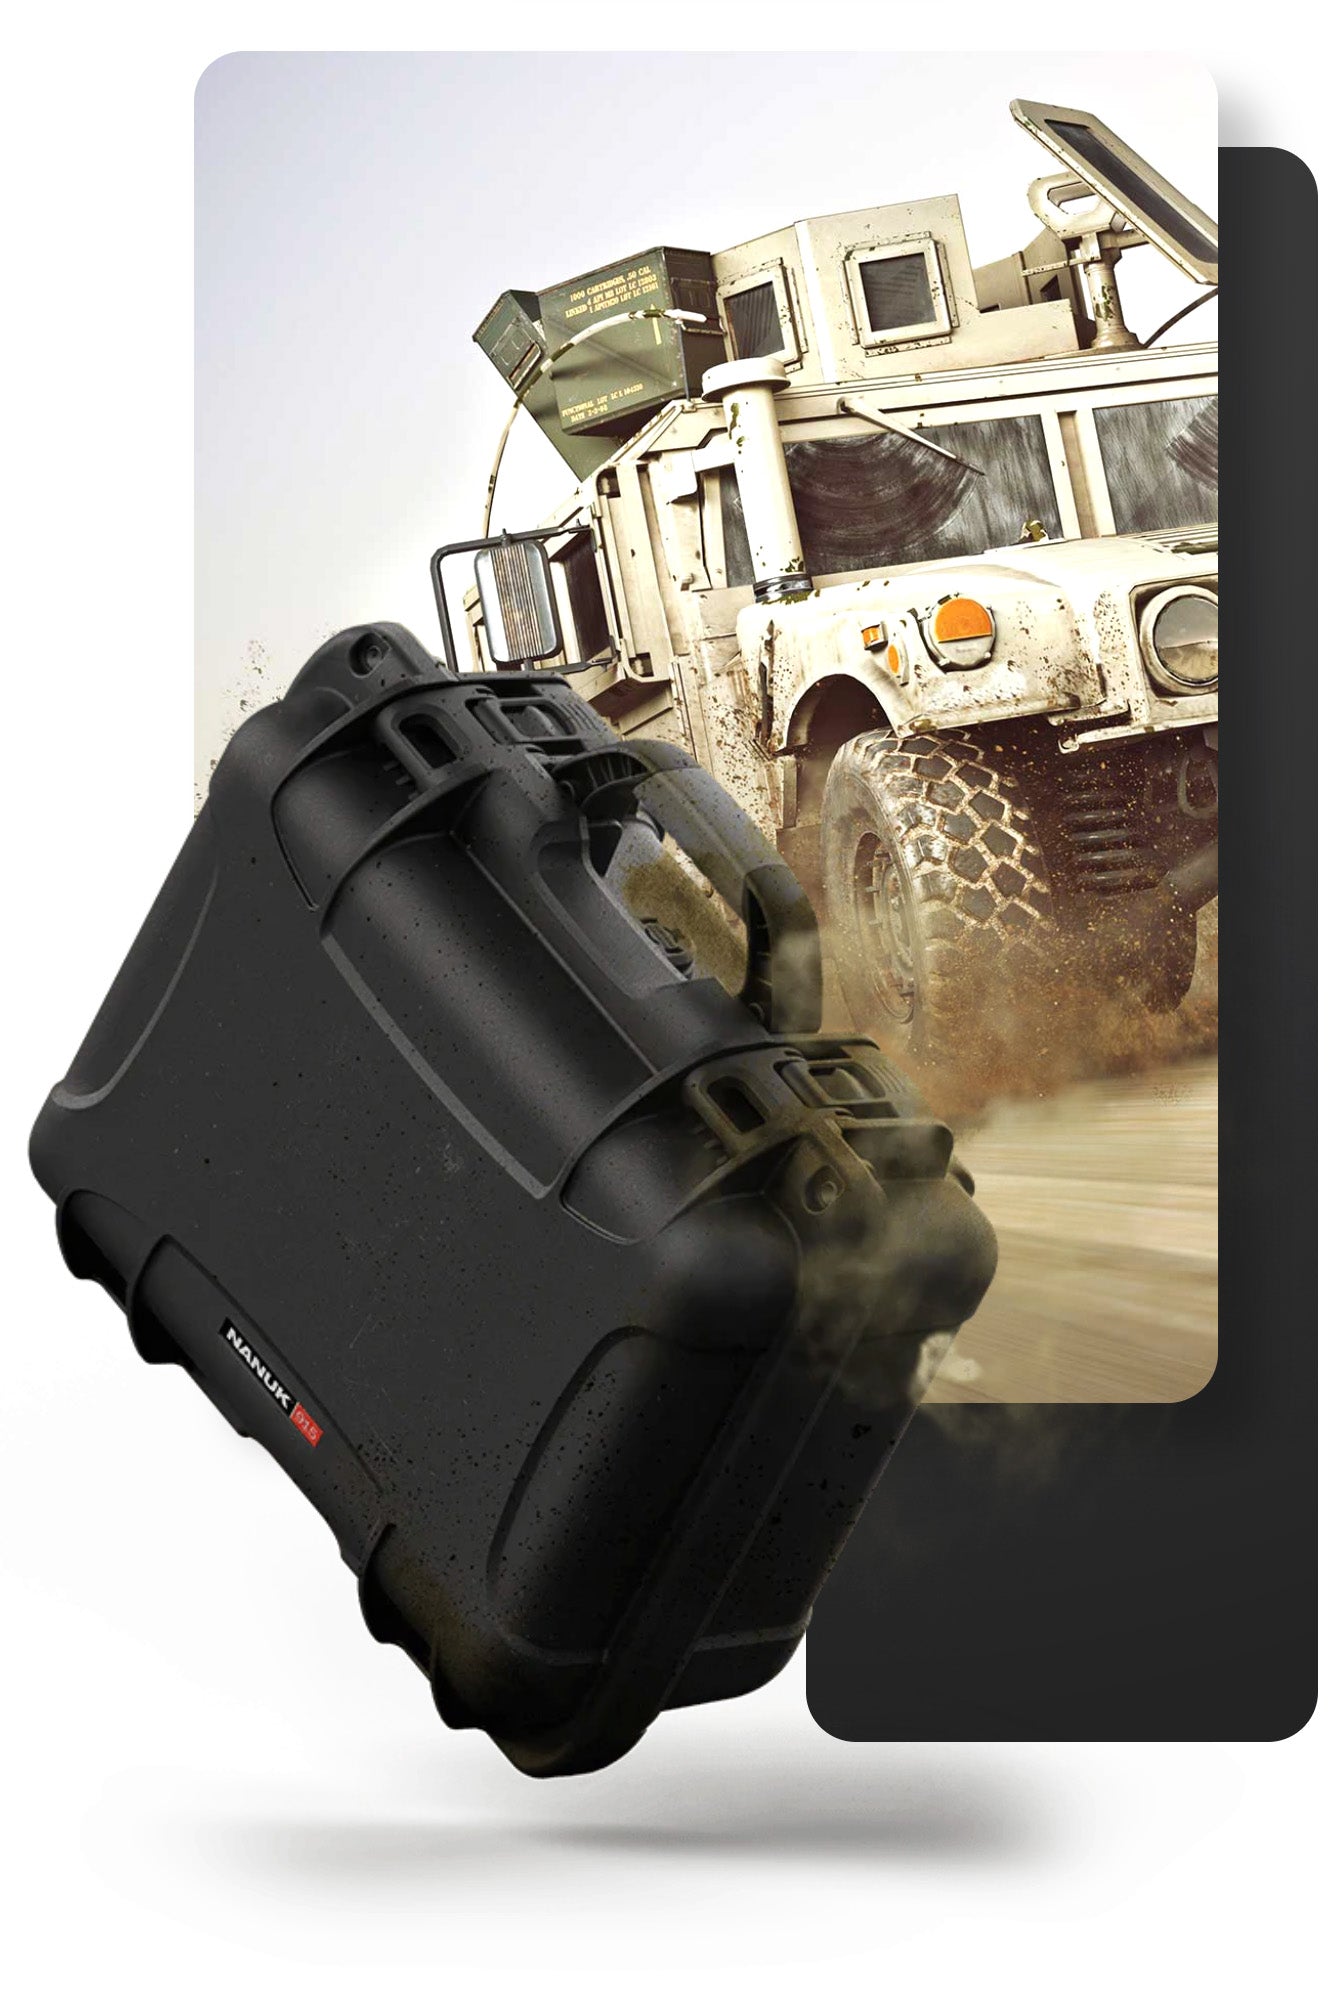 NANUK indestructible cases keep weapons and gear secure, and safeguard sensitive instruments from the repeated blows, drops and shocks that happen in the field.